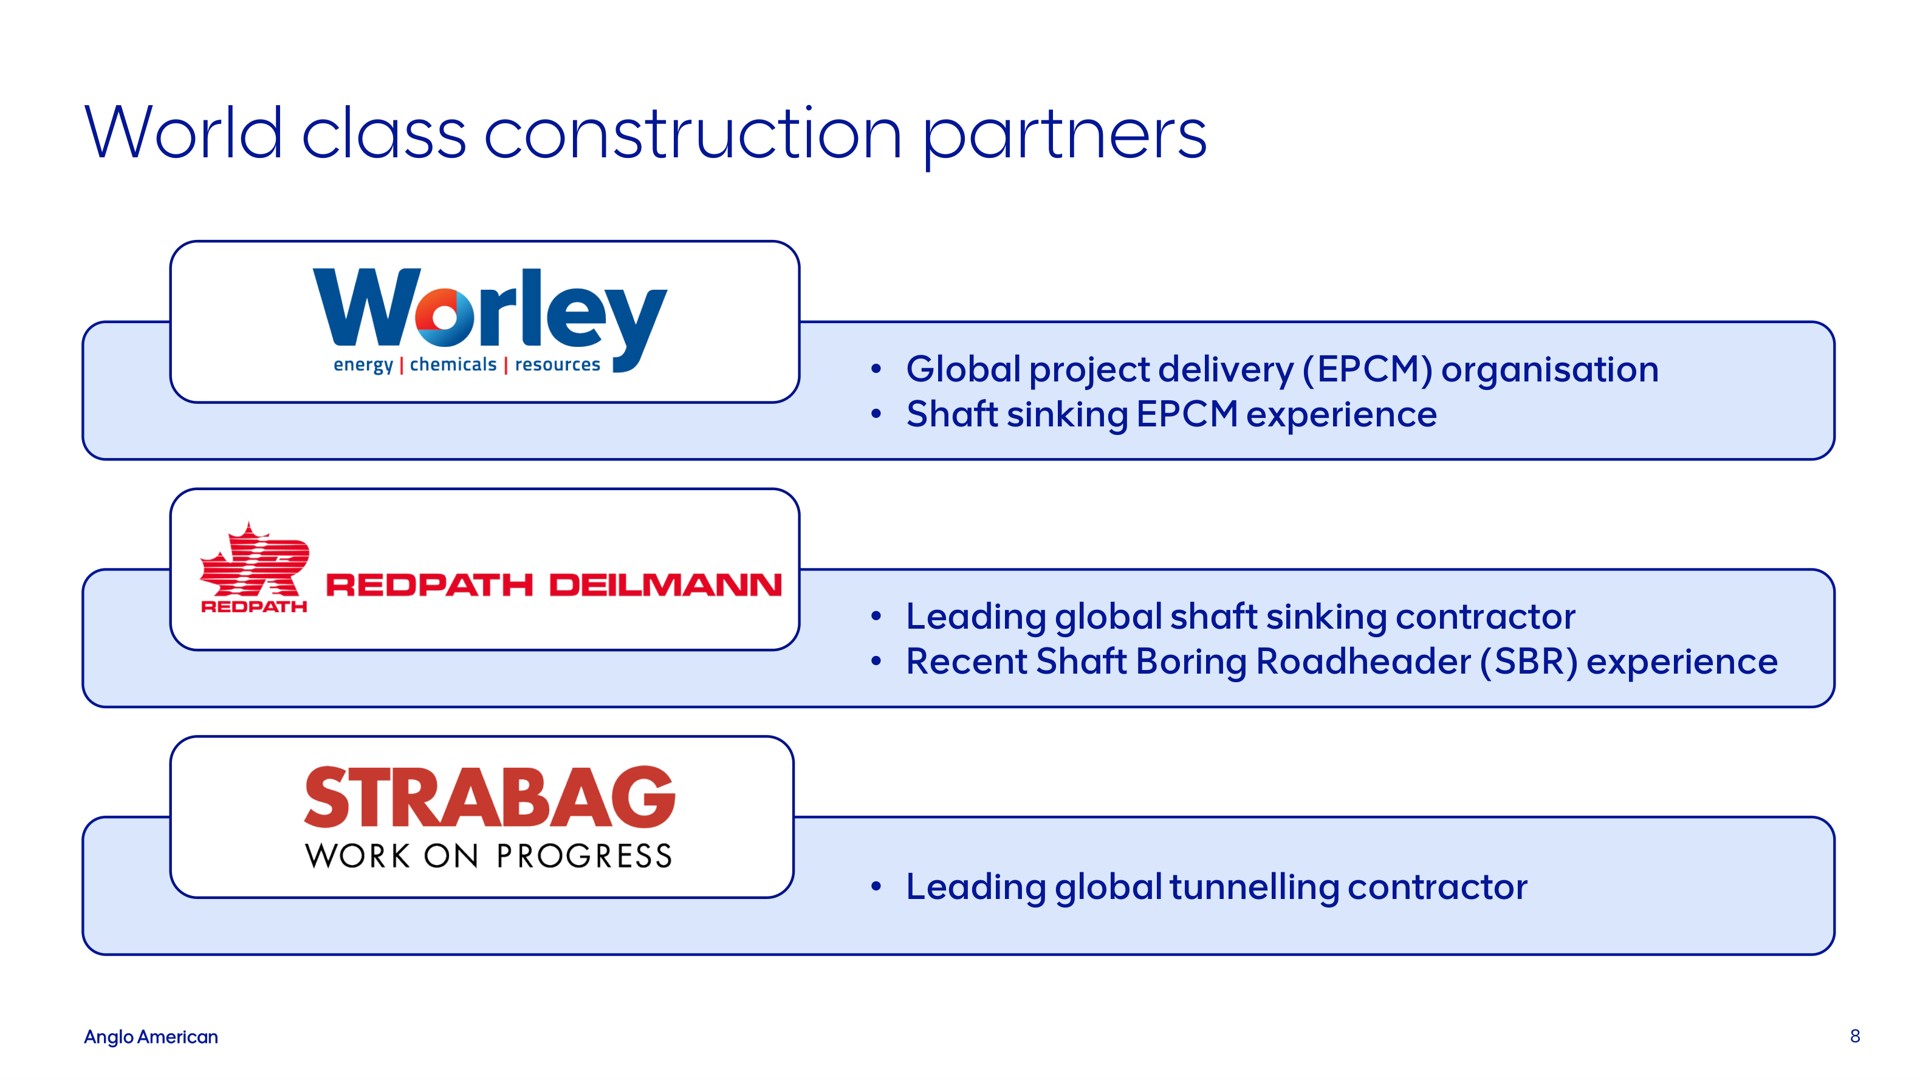 world class construction partners | AngloAmerican